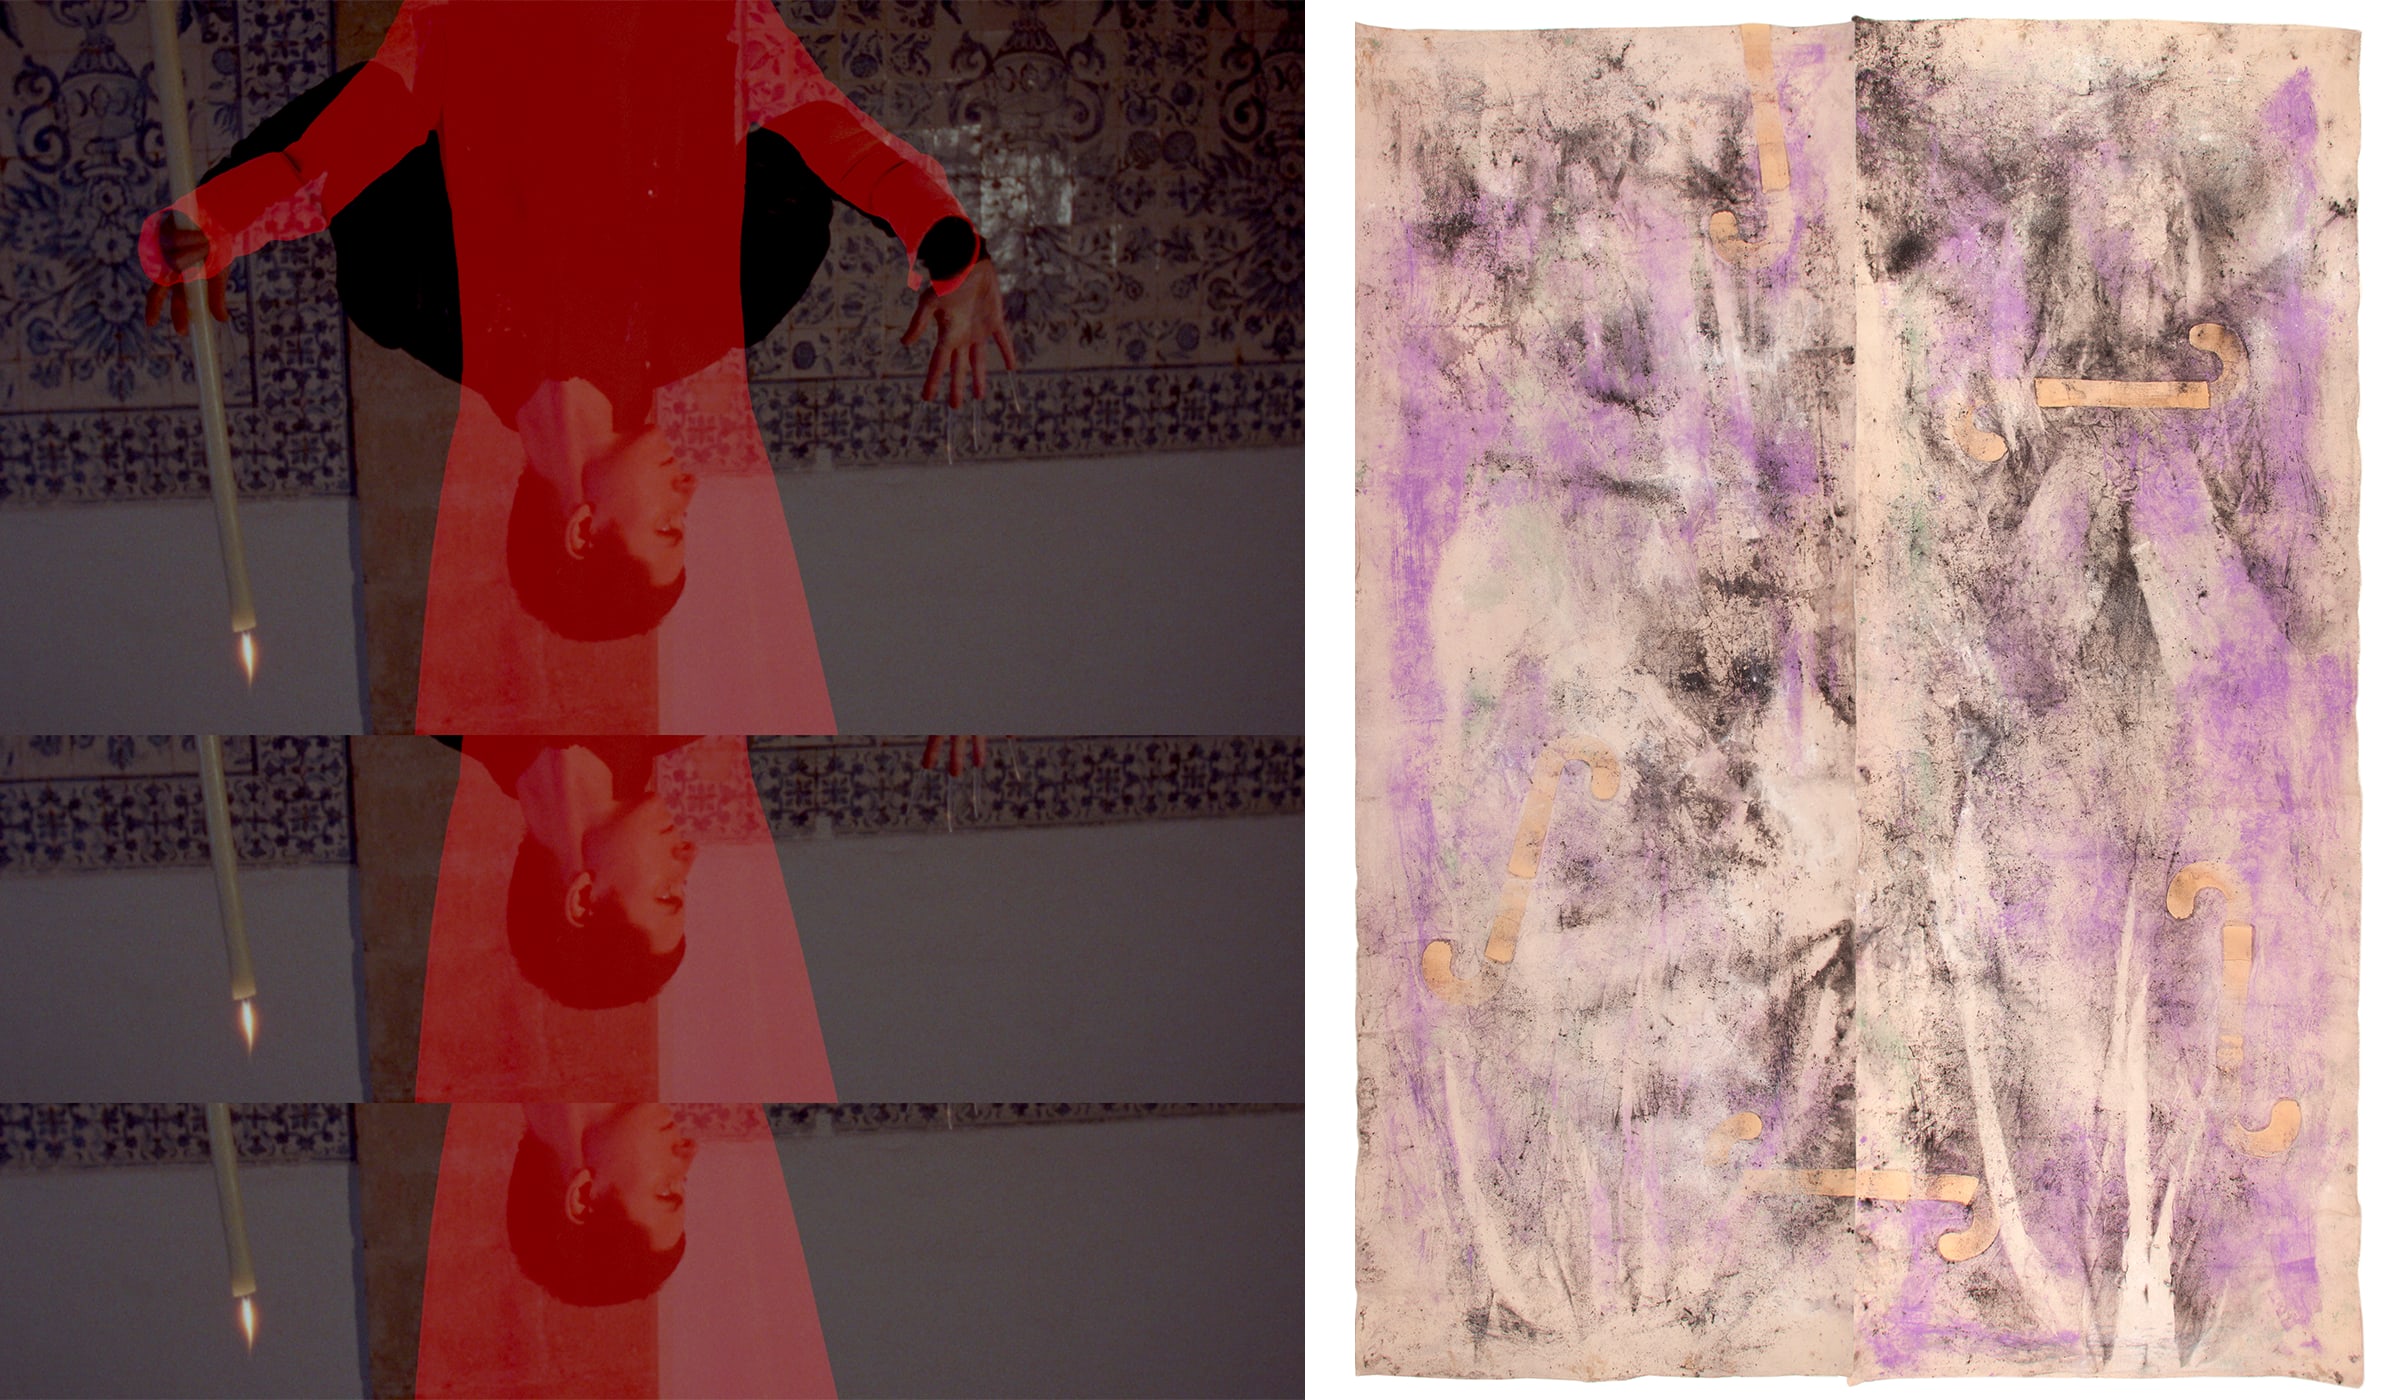 Left: Jessica Warboys, THIS TAIL GROWS AMONG RUINS, 2023. Right: ﻿River Painting, Fossbekken, 2022. Both courtesy of the artist and Gaudel de Stampa.